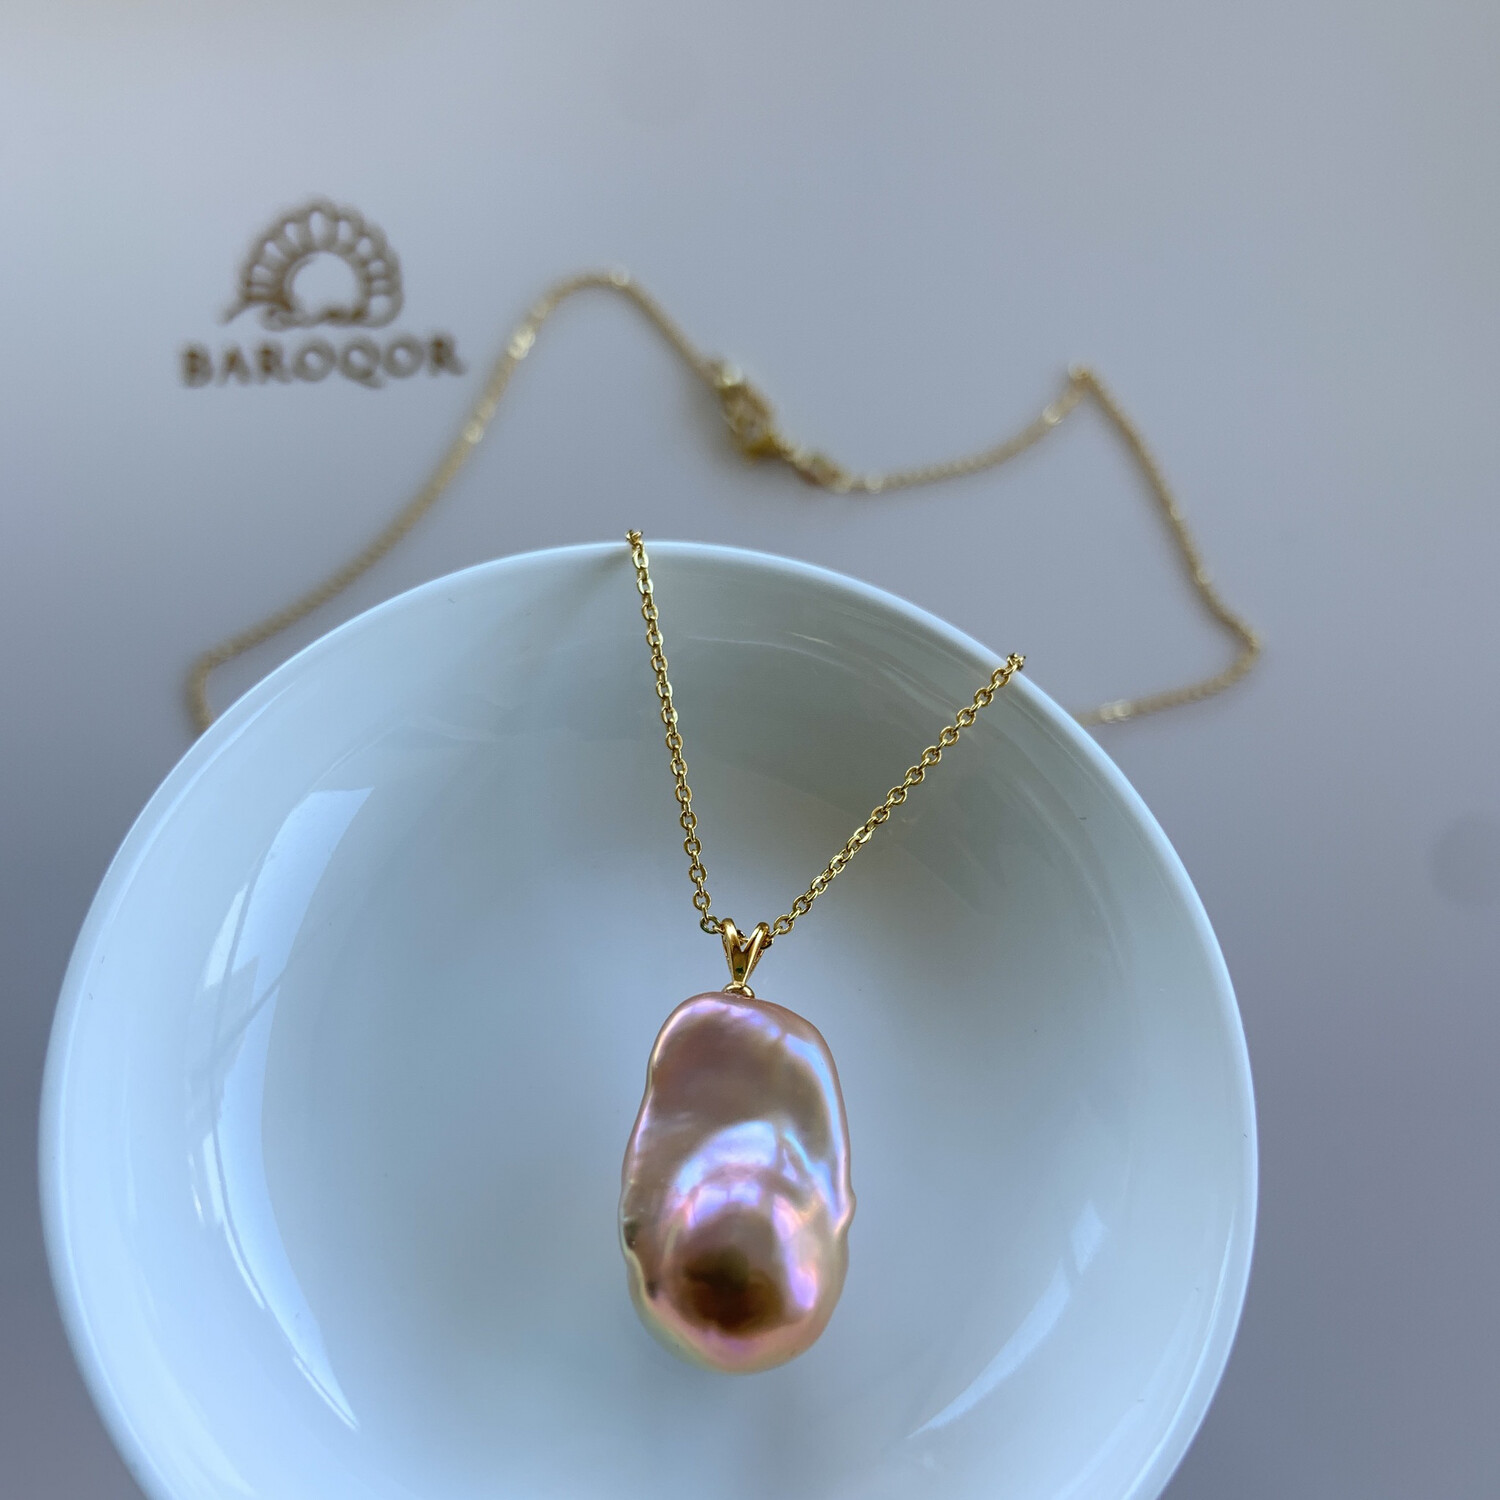 ‘Smooth Operator’ Pink Baroque pearl Adjustable Necklace 22x14.5mm